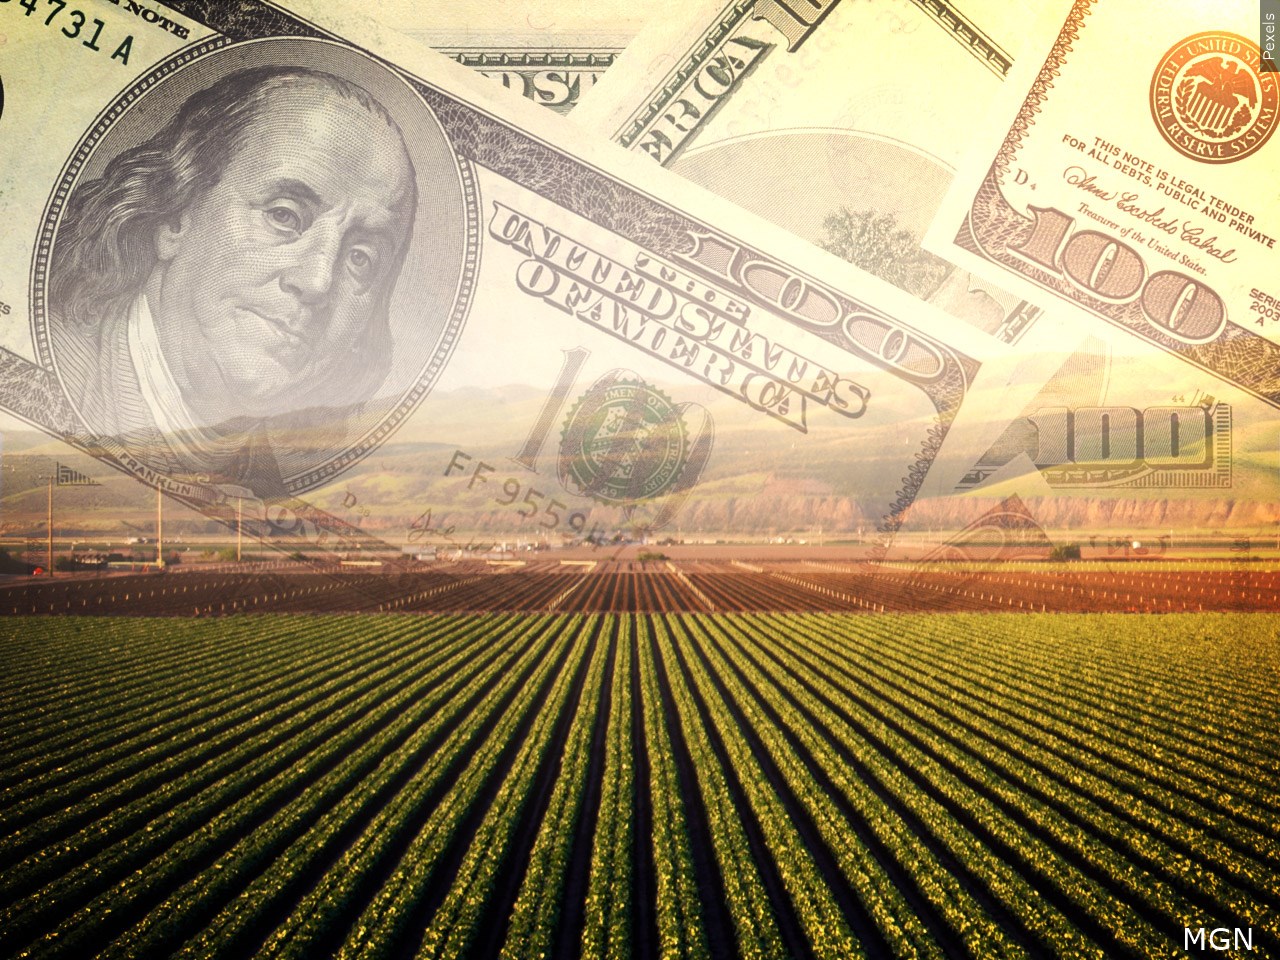 ‘Mississippi Agriculture Thrives: ‘Feeding the Economy’ Reports Growth’